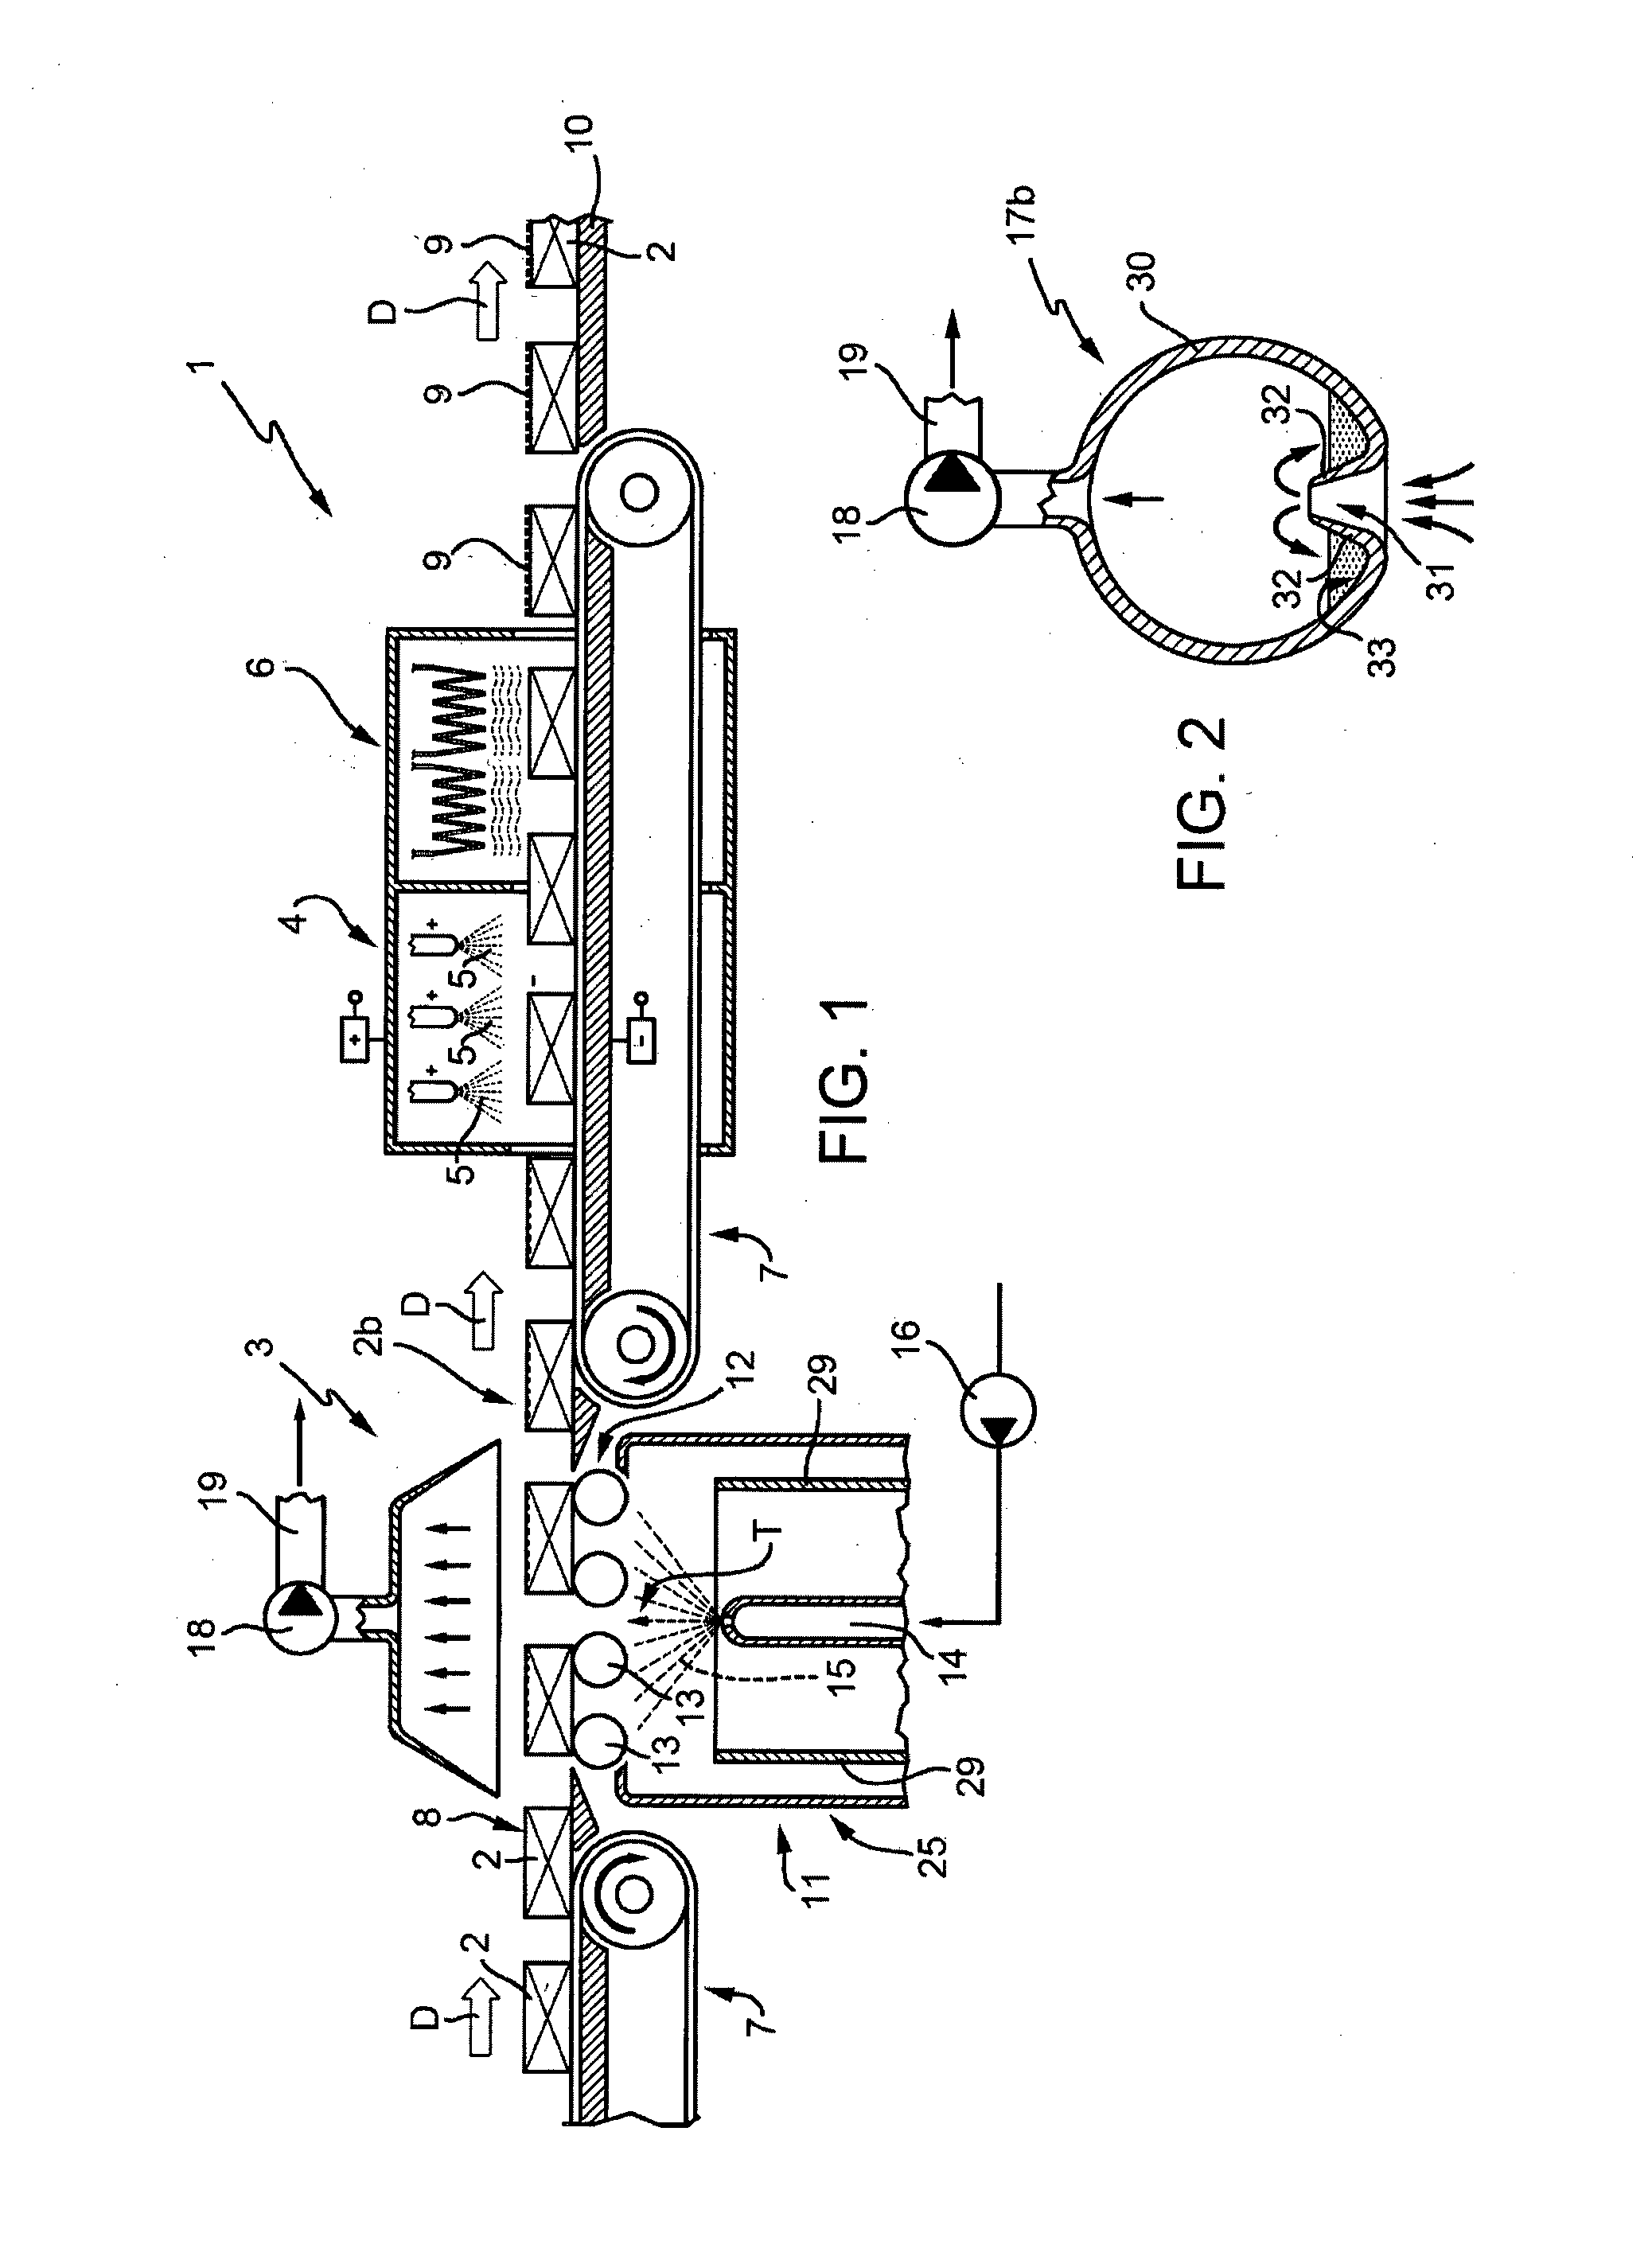 Powder coating (electrostatic painting) method and plant for non electrically conductive elements, and in particular brake pads